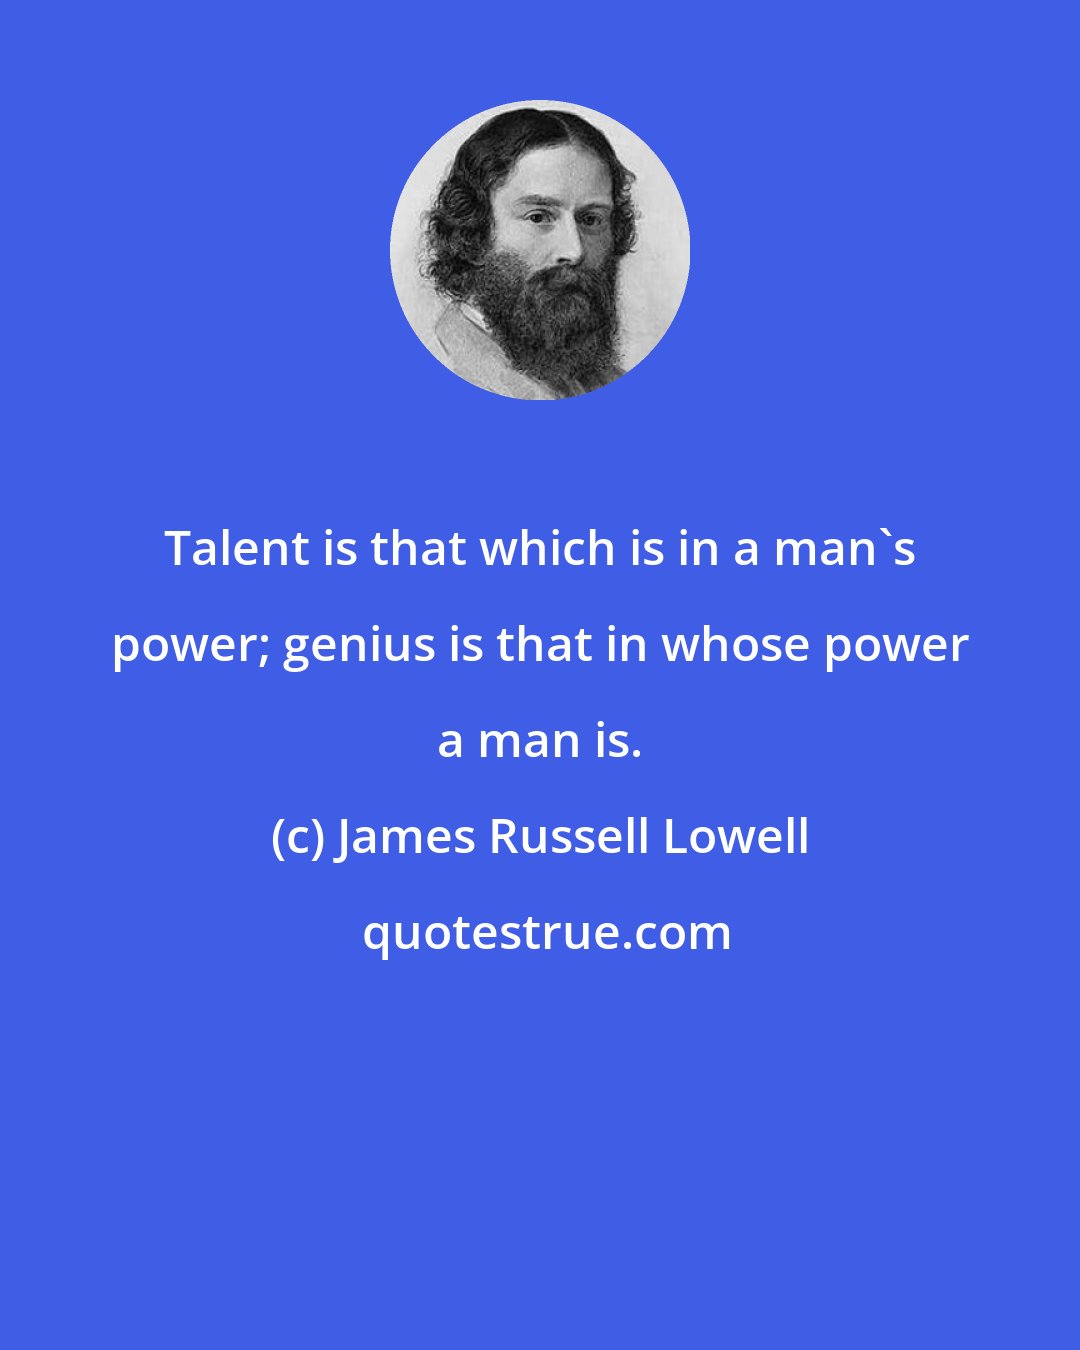 James Russell Lowell: Talent is that which is in a man's power; genius is that in whose power a man is.